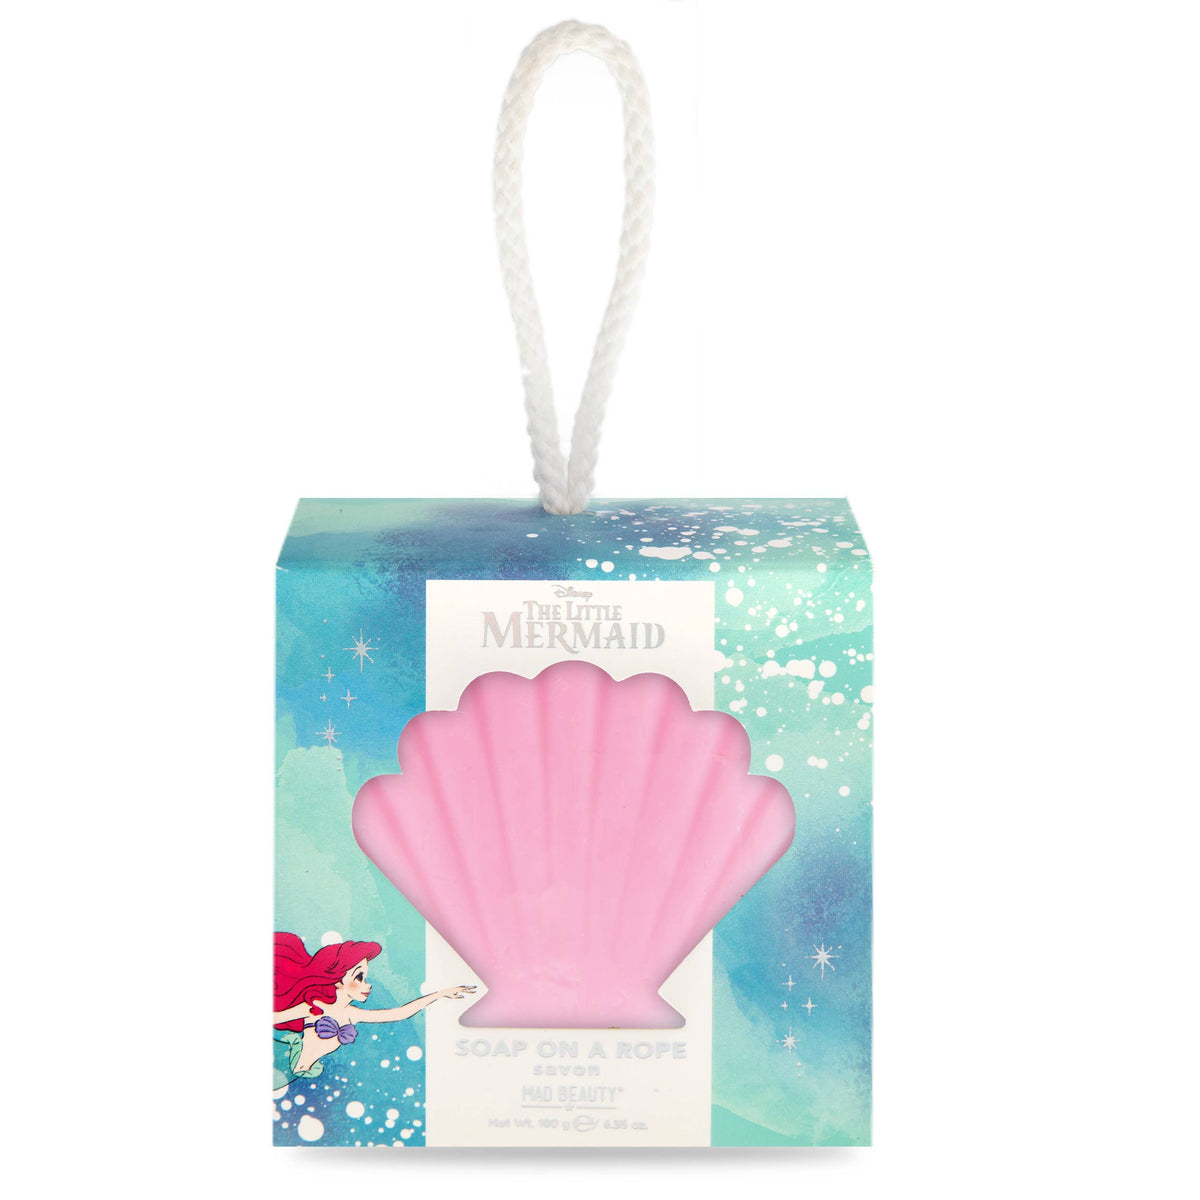 Mad Beauty Little Mermaid Shell Soap on a Rope